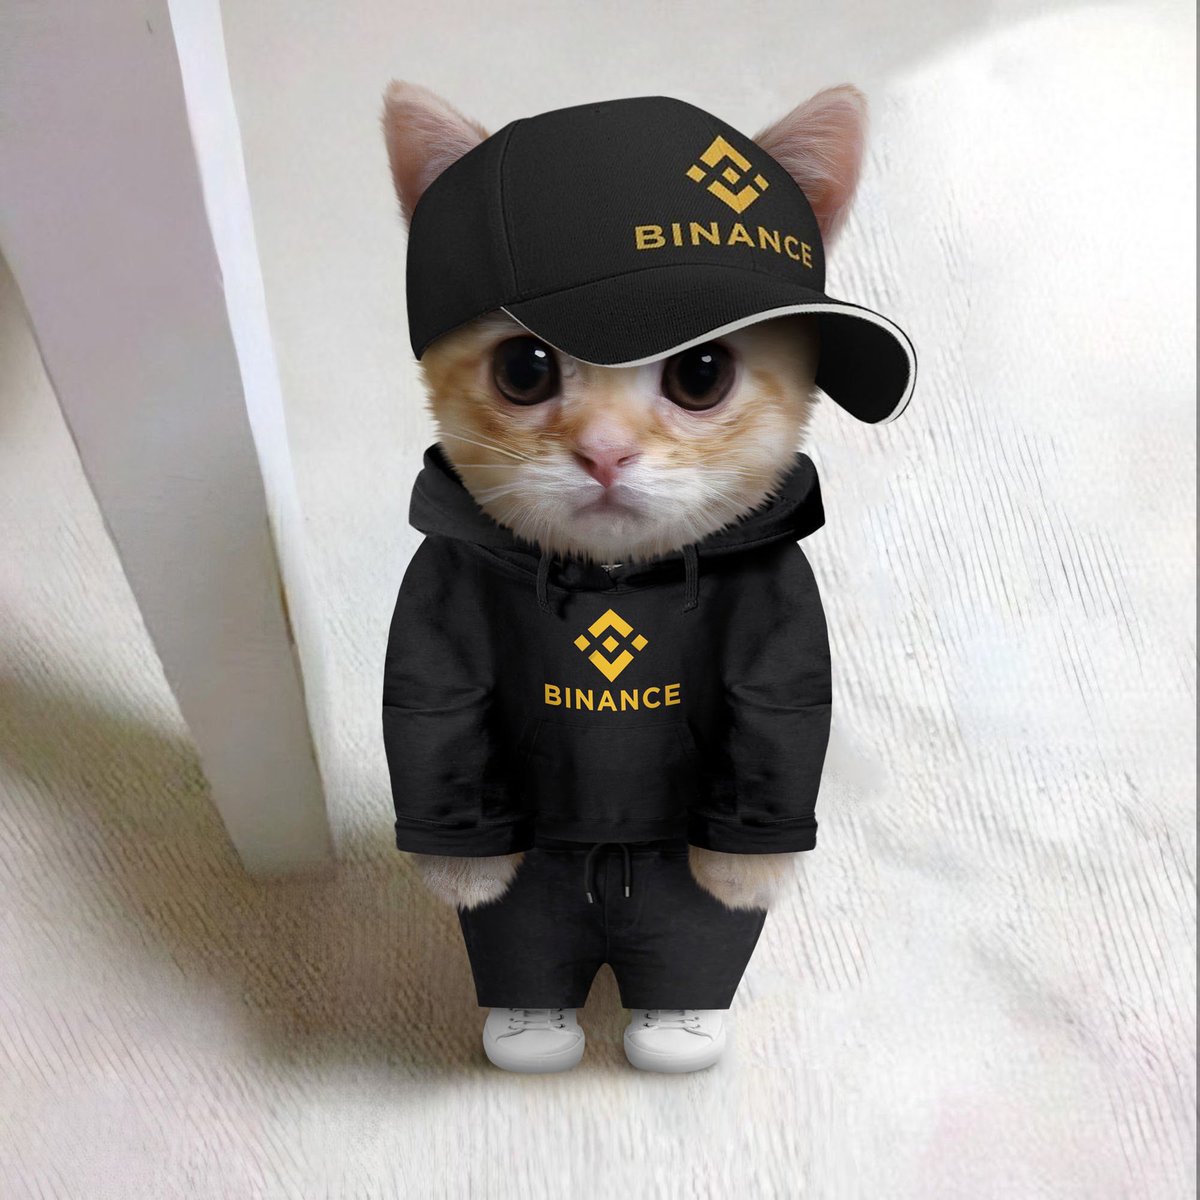 Which level 1 exchange will #catcoin be listed on next? Please follow me.